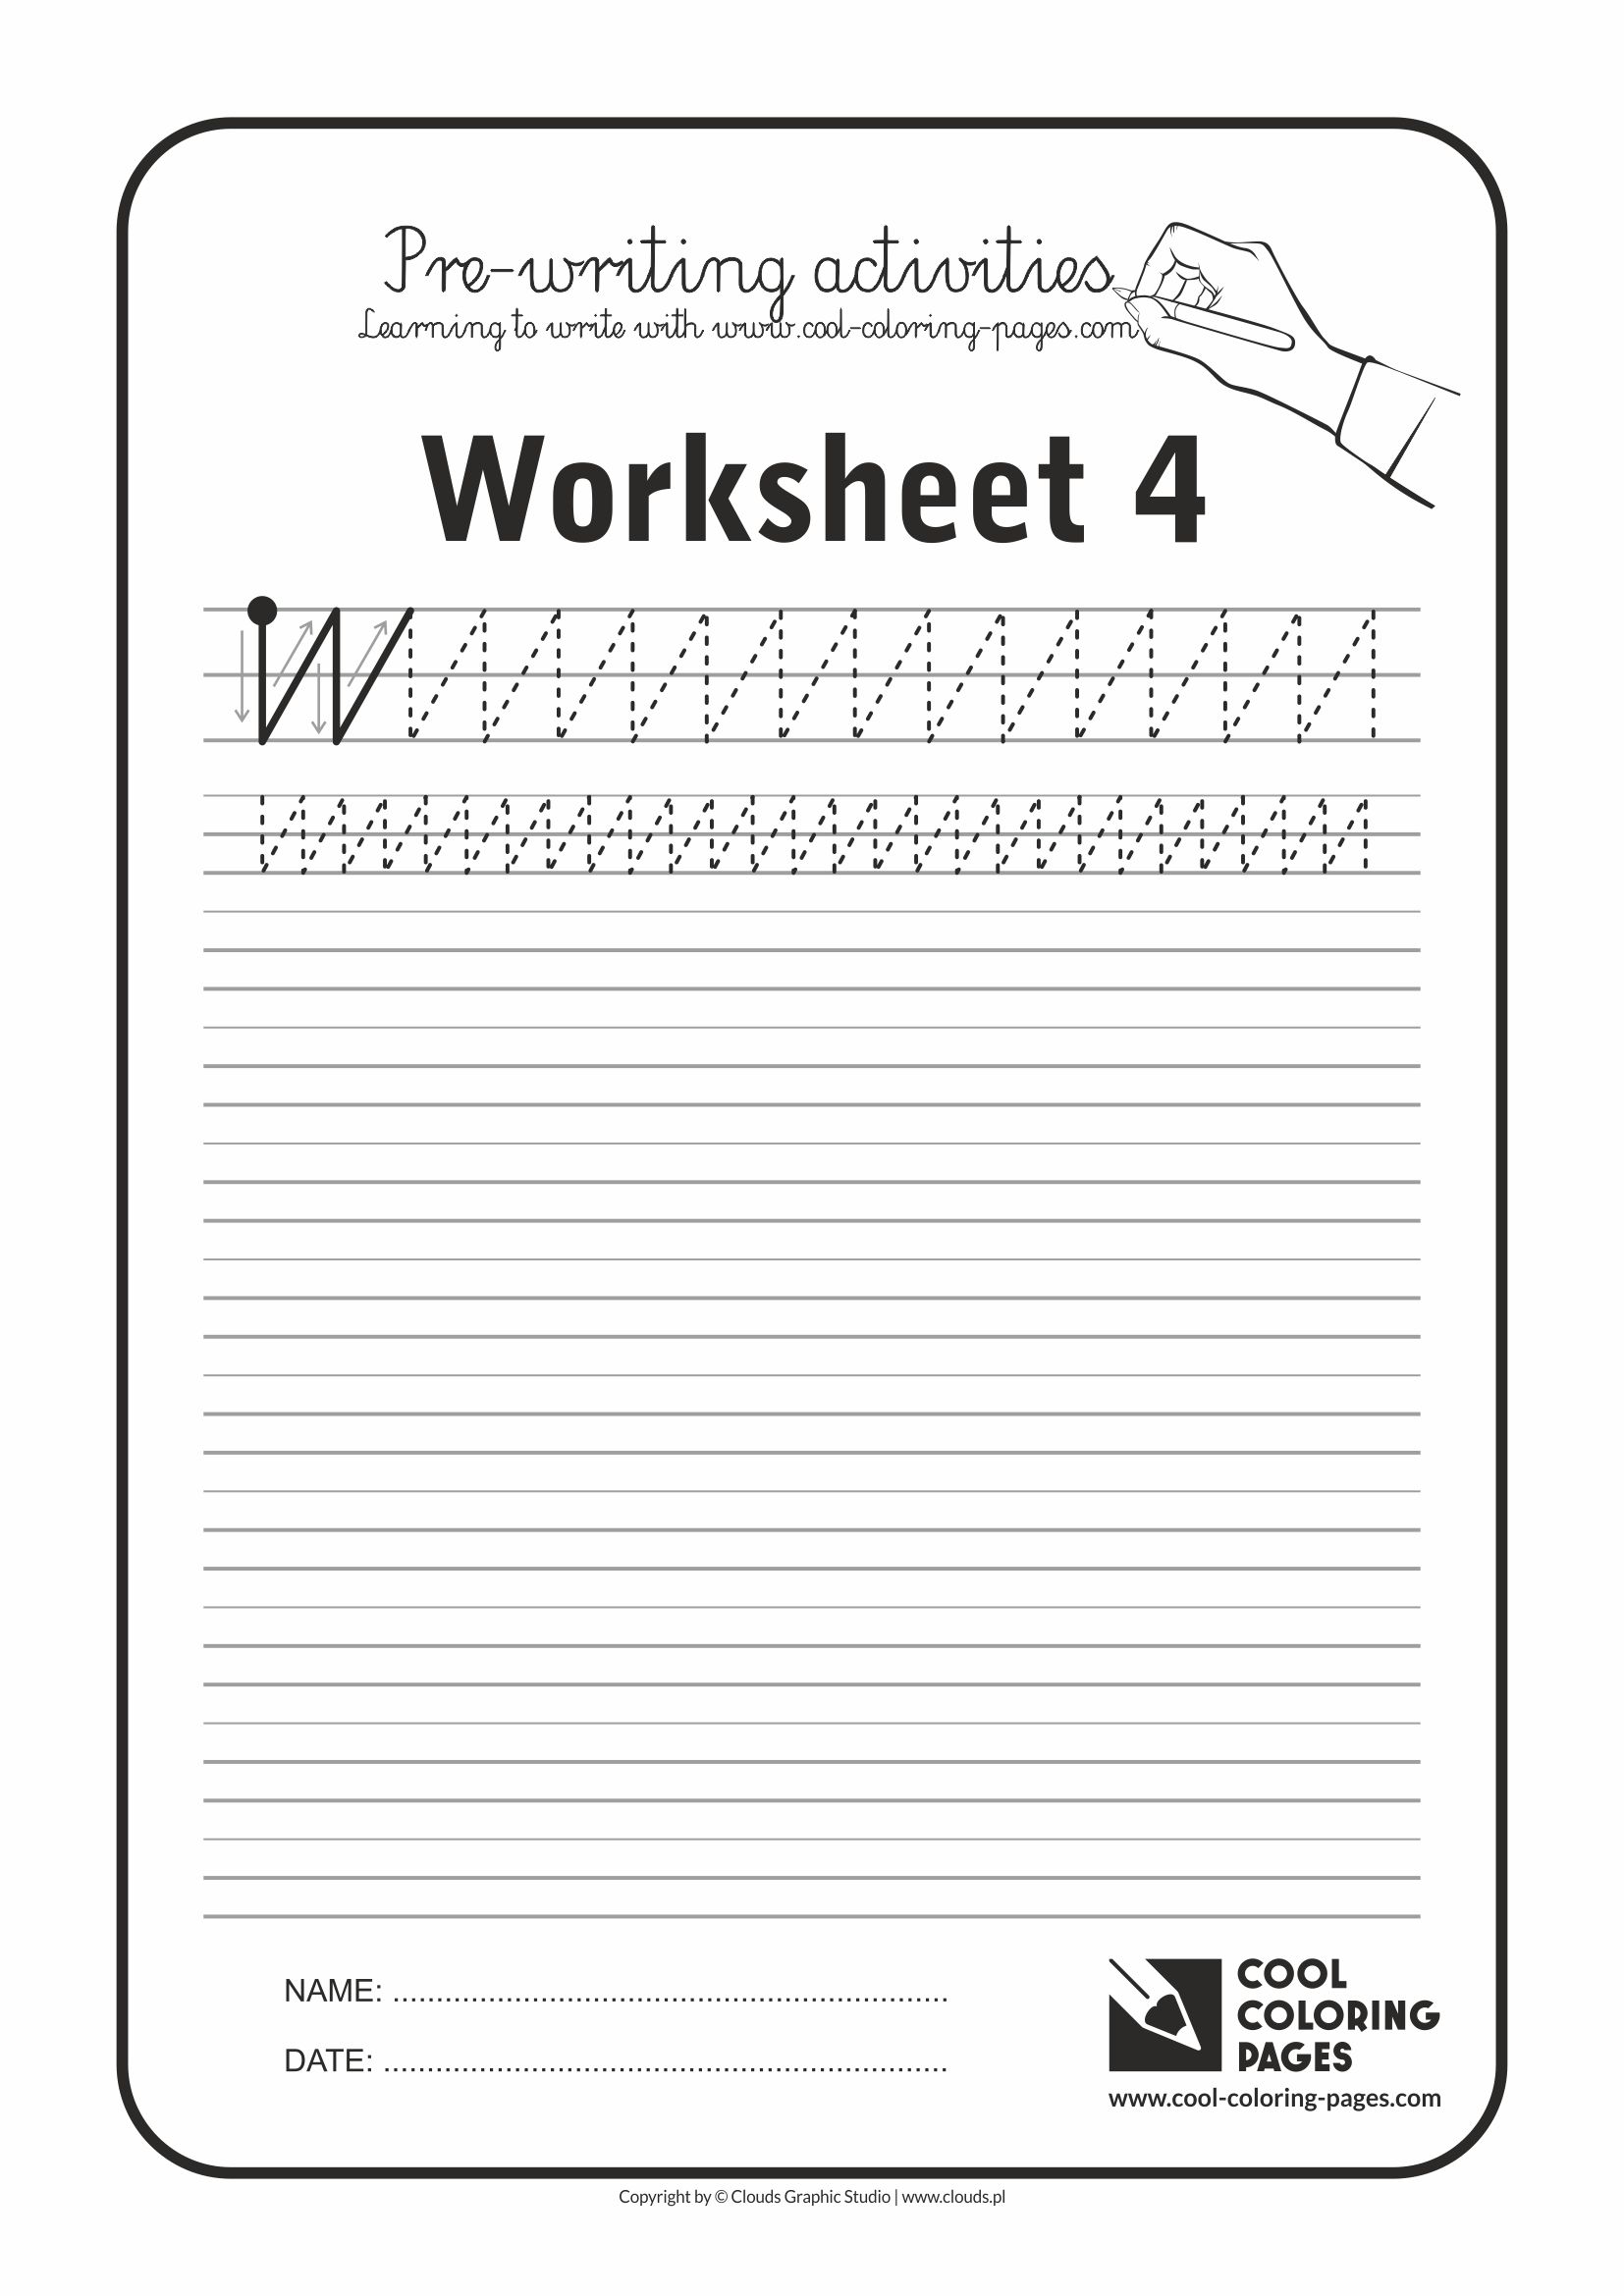 Cool Coloring Pages / Pre-writing activities / Worksheet no.4